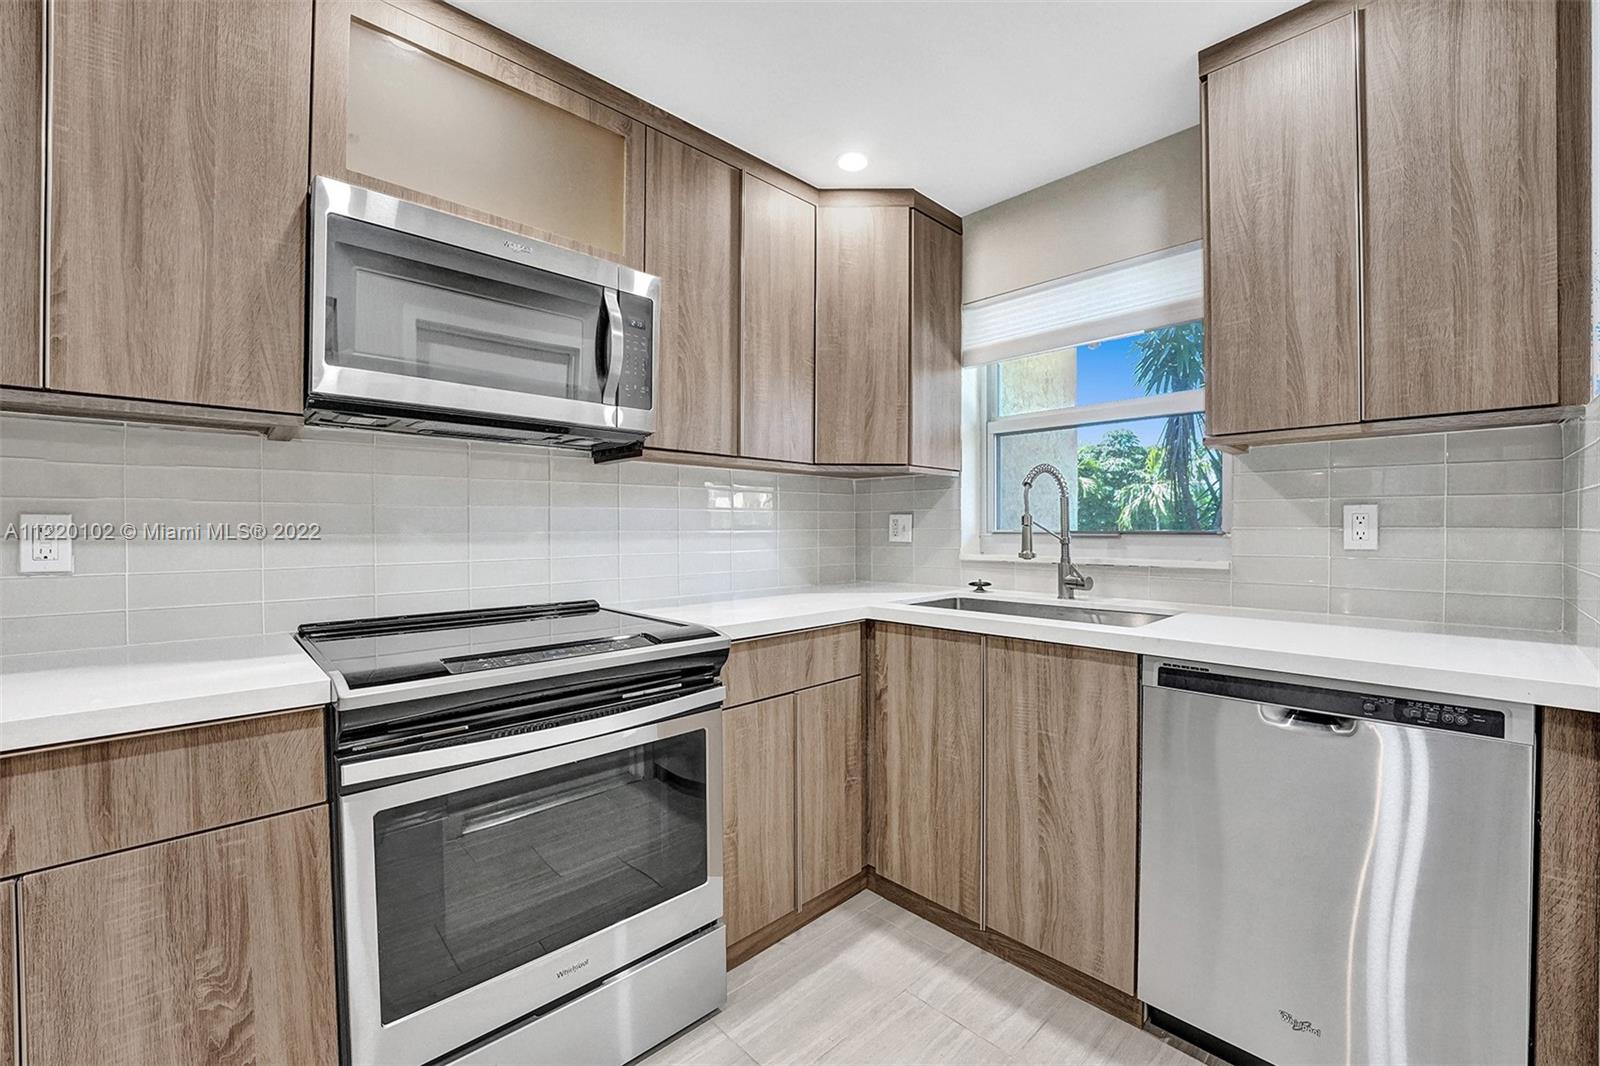 a kitchen with granite countertop cabinets stainless steel appliances and wooden floor